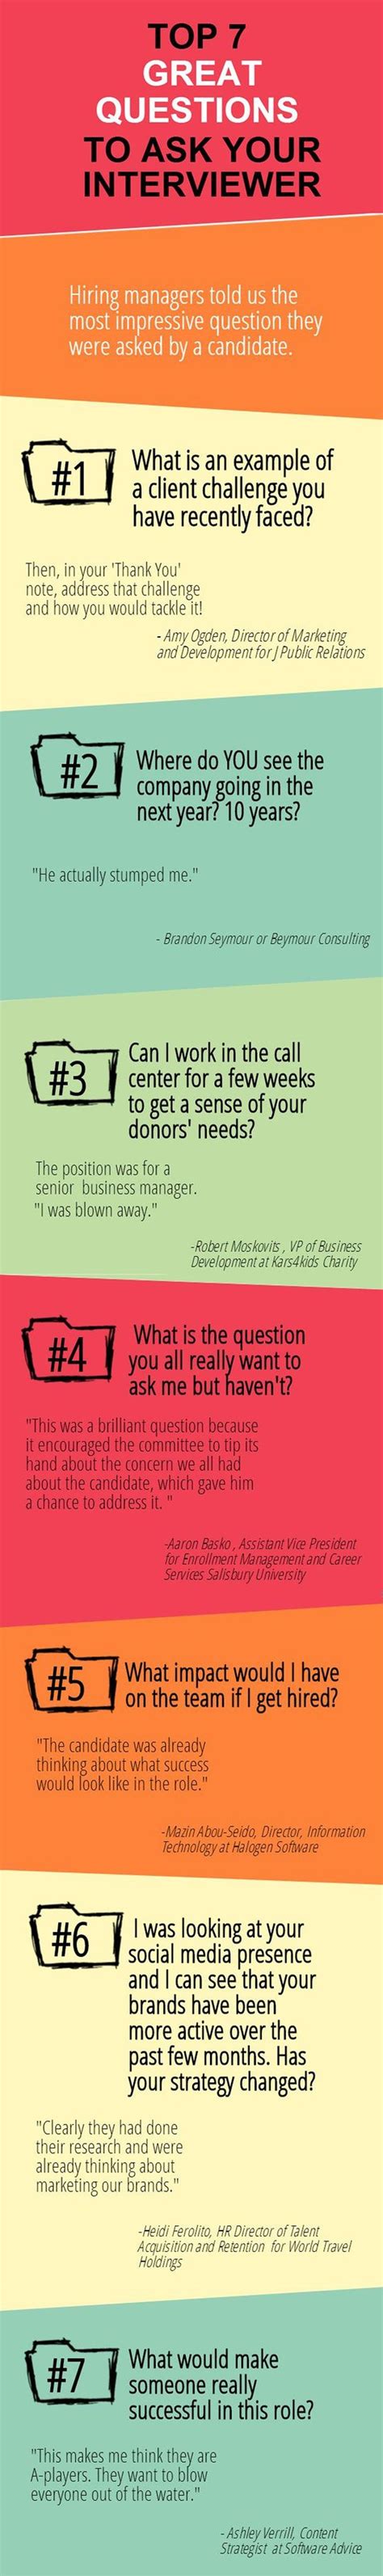 Don't ask anything too personal: Interview Questions to Ask an Interviewer | The Muse